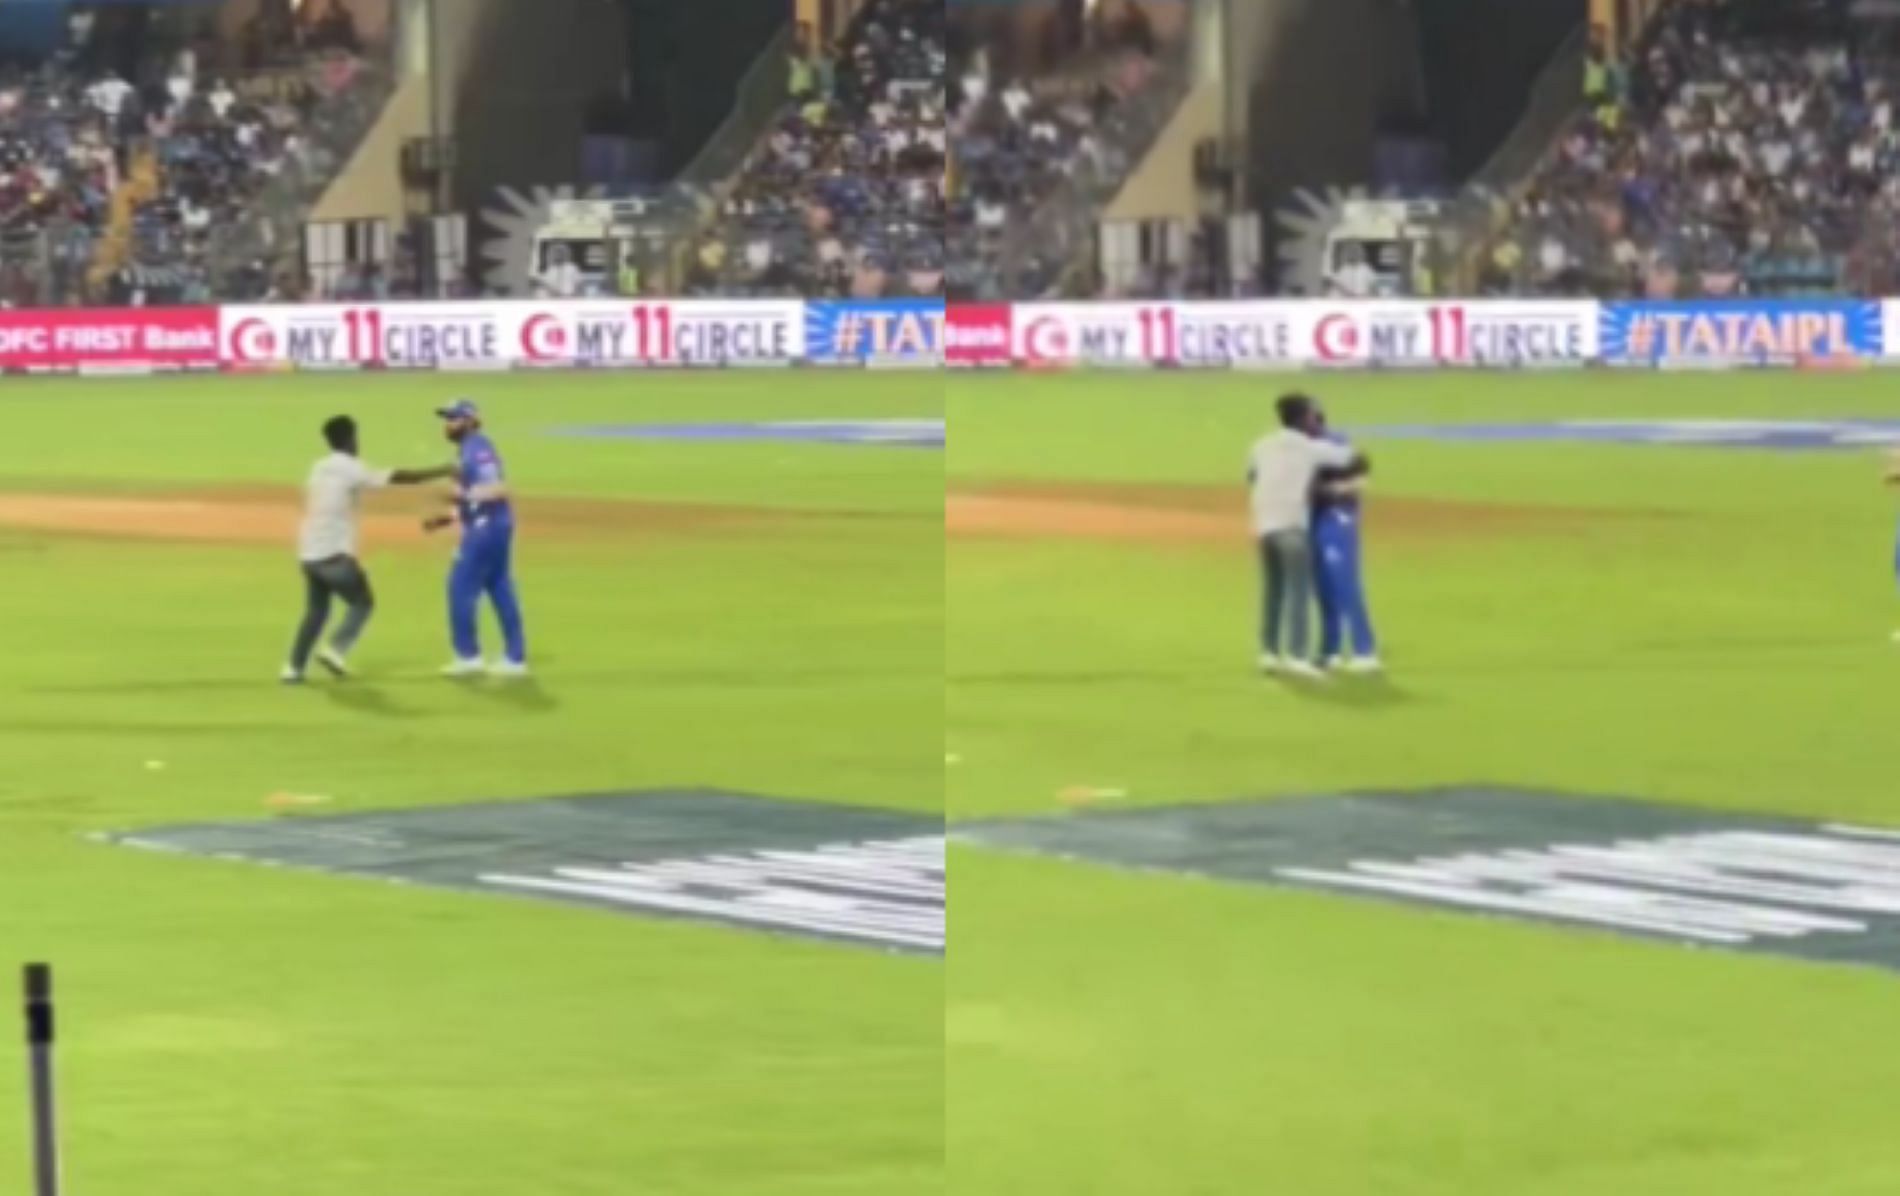 Rohit was busy setting the field when a fan invaded the pitch at the Wankhede Stadium [Credit: Fan Twitter handle]